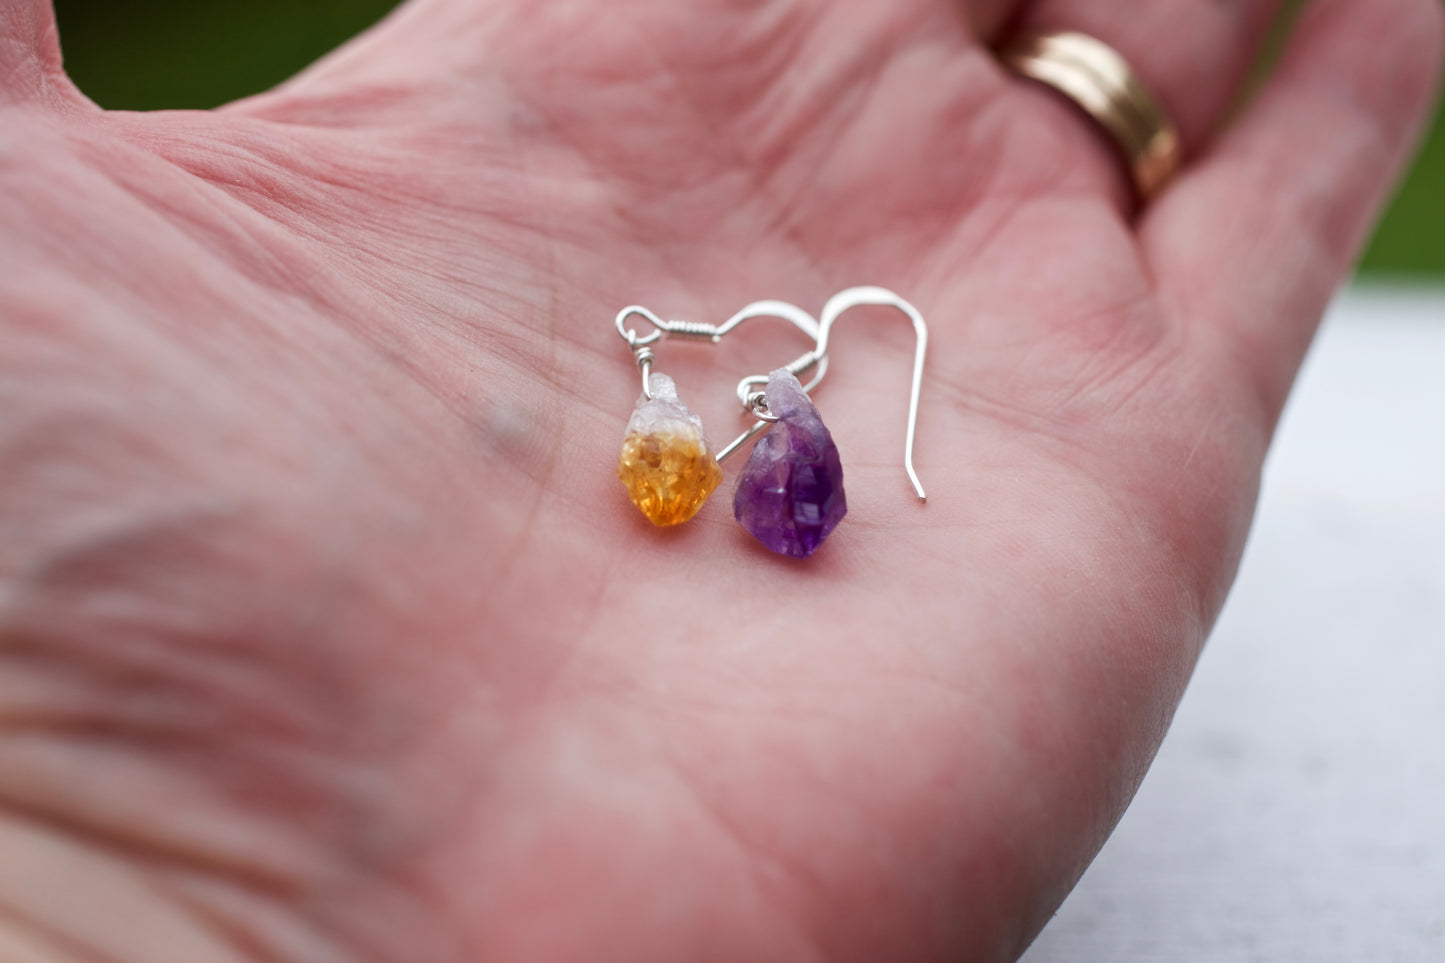 One of Each: Tiny Raw Amethyst Crystal Point, Tiny Raw Citrine Crystal Point, and Sterling Silver Non-Matching Earrings